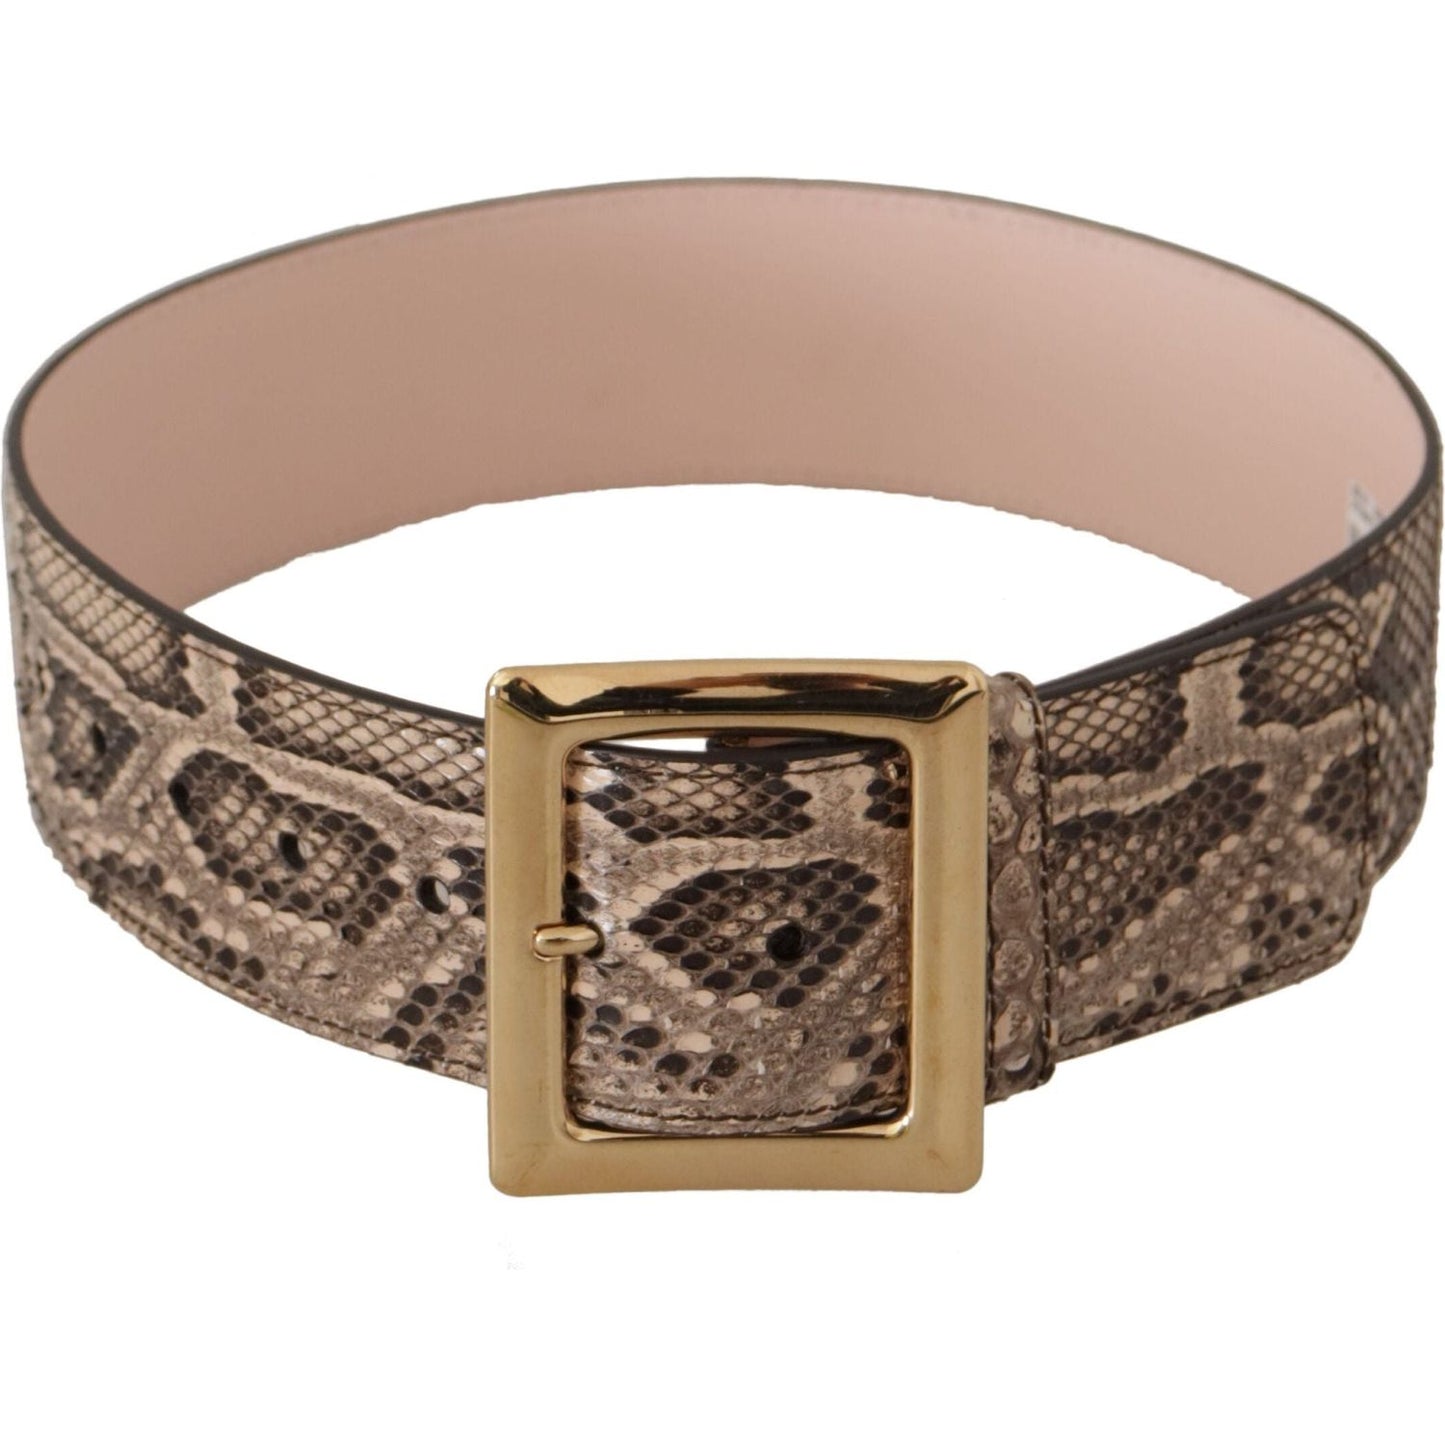 Dolce & Gabbana Elegant Leather Belt with Logo Buckle beige-exotic-leather-wide-gold-metal-buckle-belt IMG_9757-1-scaled-0537aa2b-51a.jpg